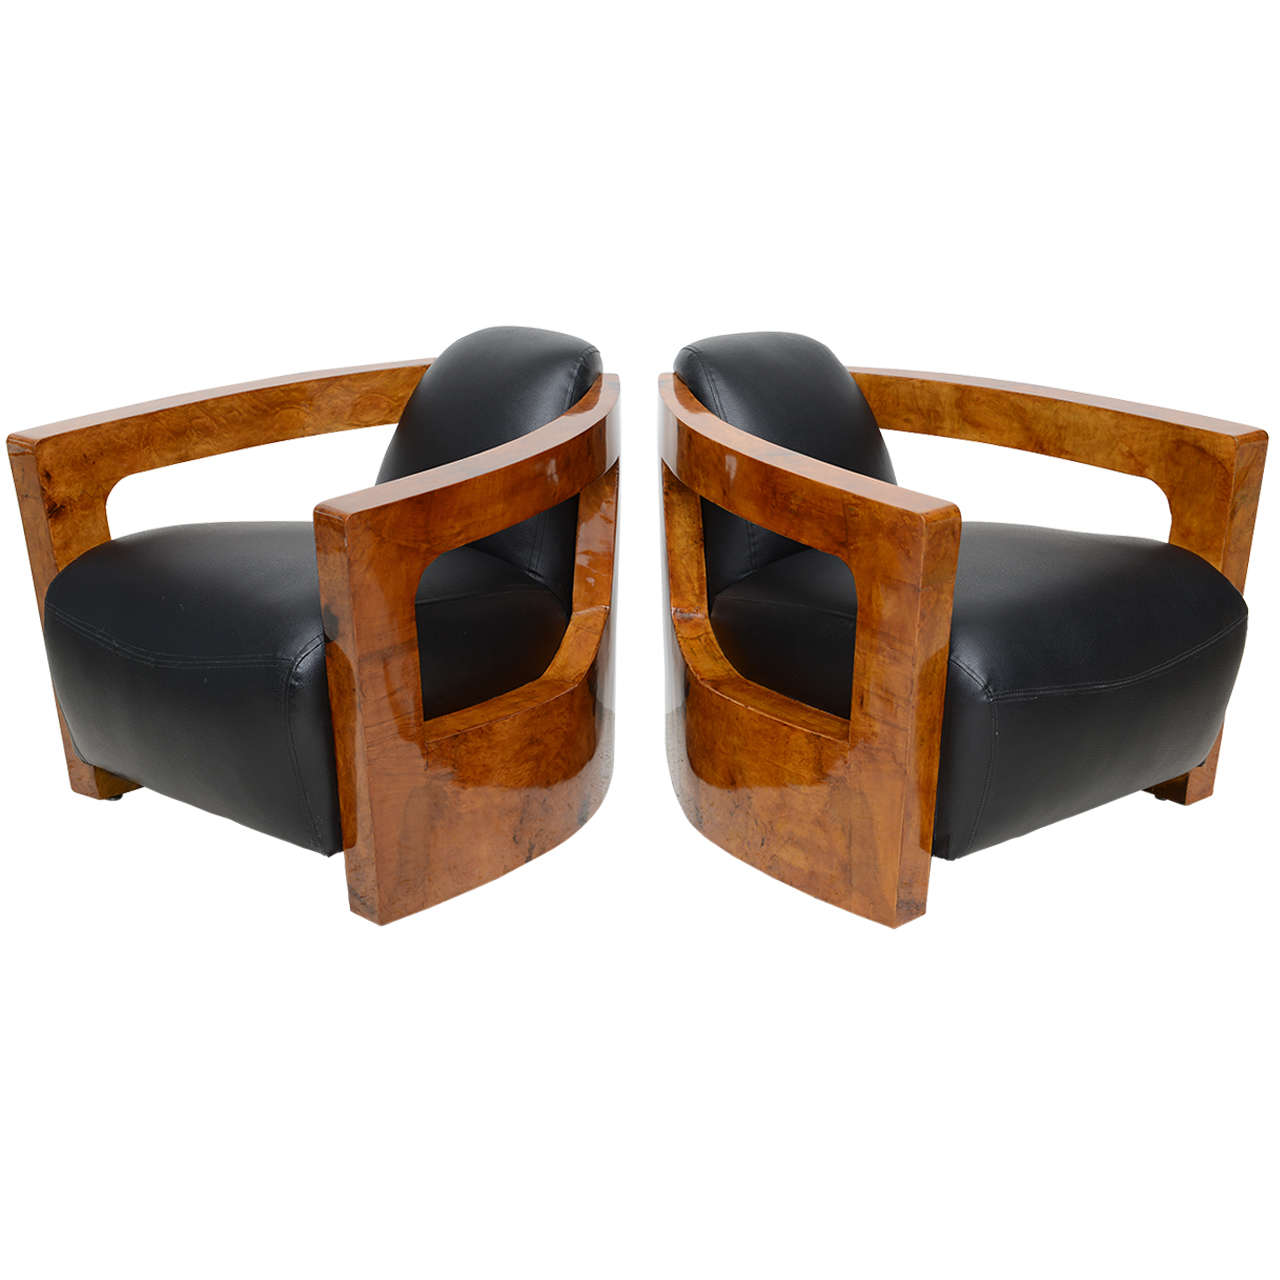 A Fine Pair Italian Modern Rootwood Armchairs, 1960s